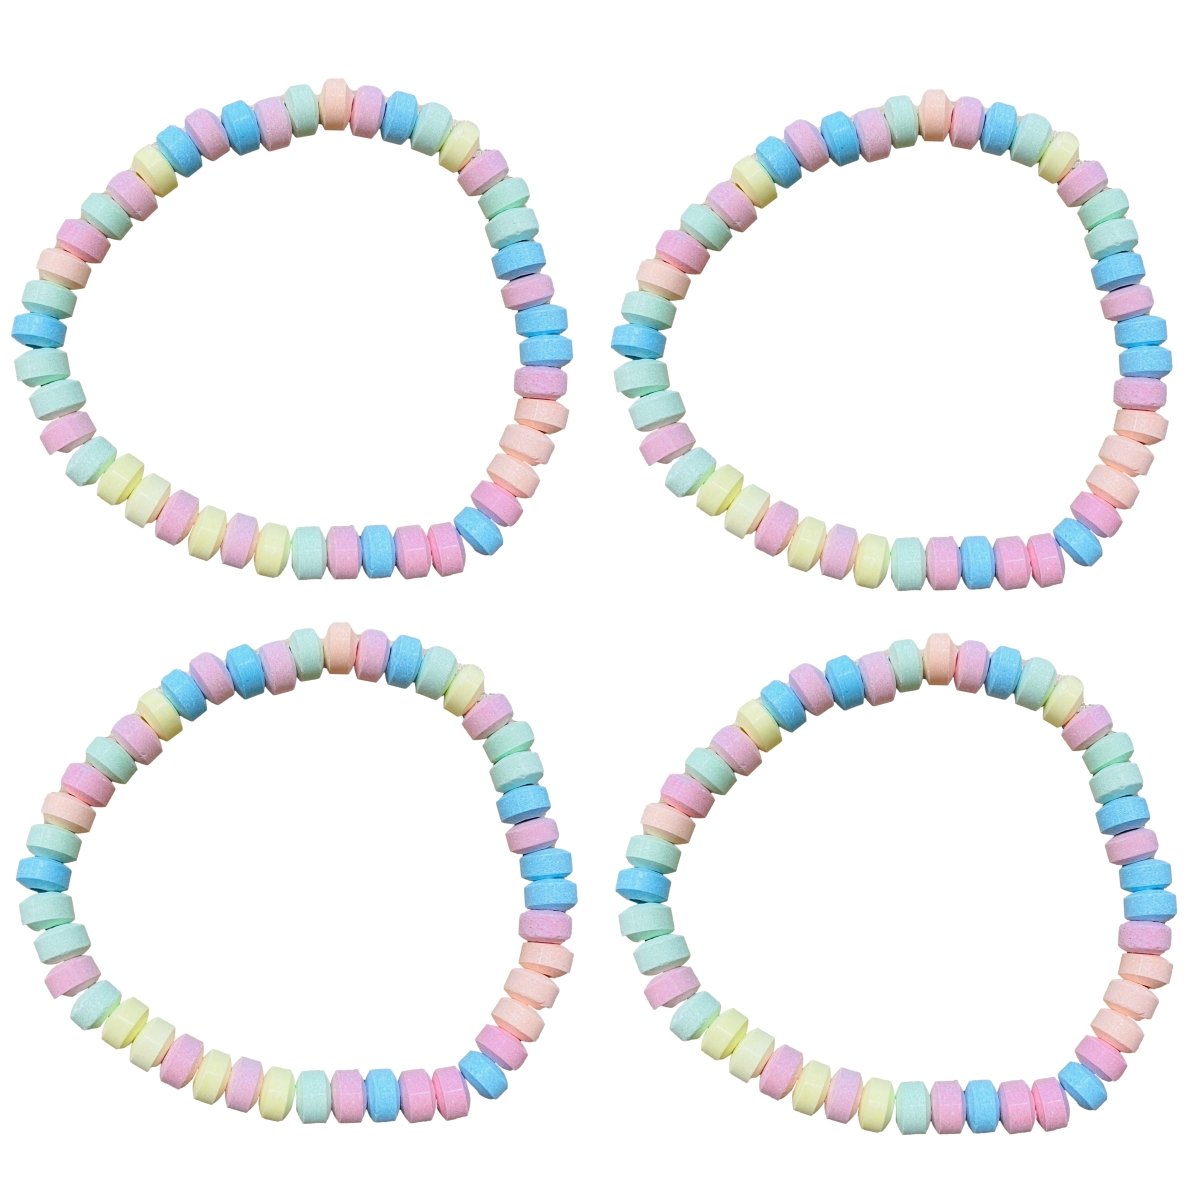 Candy Necklace 4 Pack - Happy Candy UK LTD